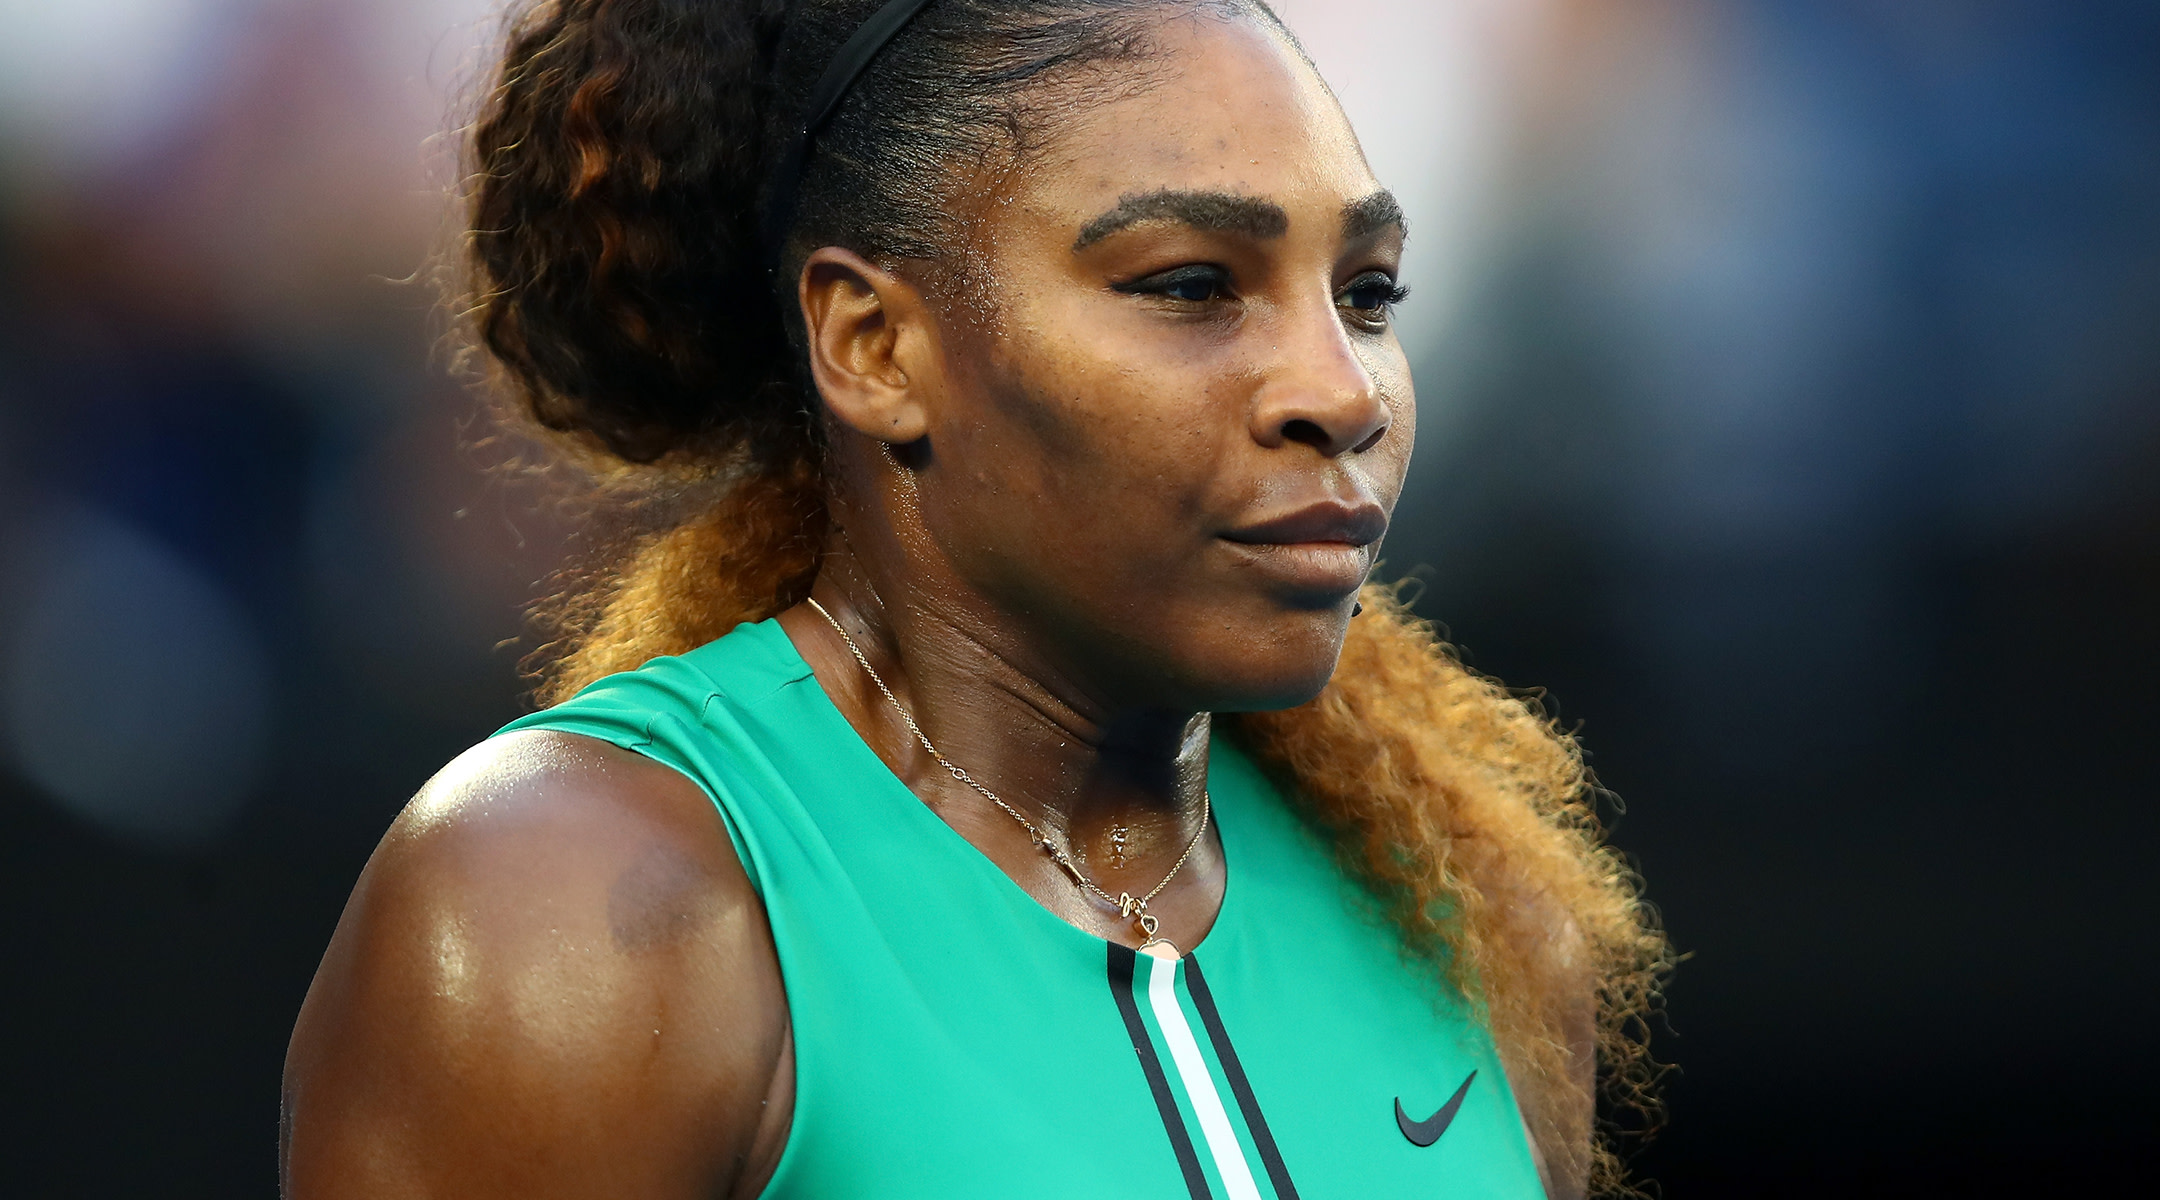 Serena Williams discusses pregnancy stigma in sports in an interview with NowThis News. 